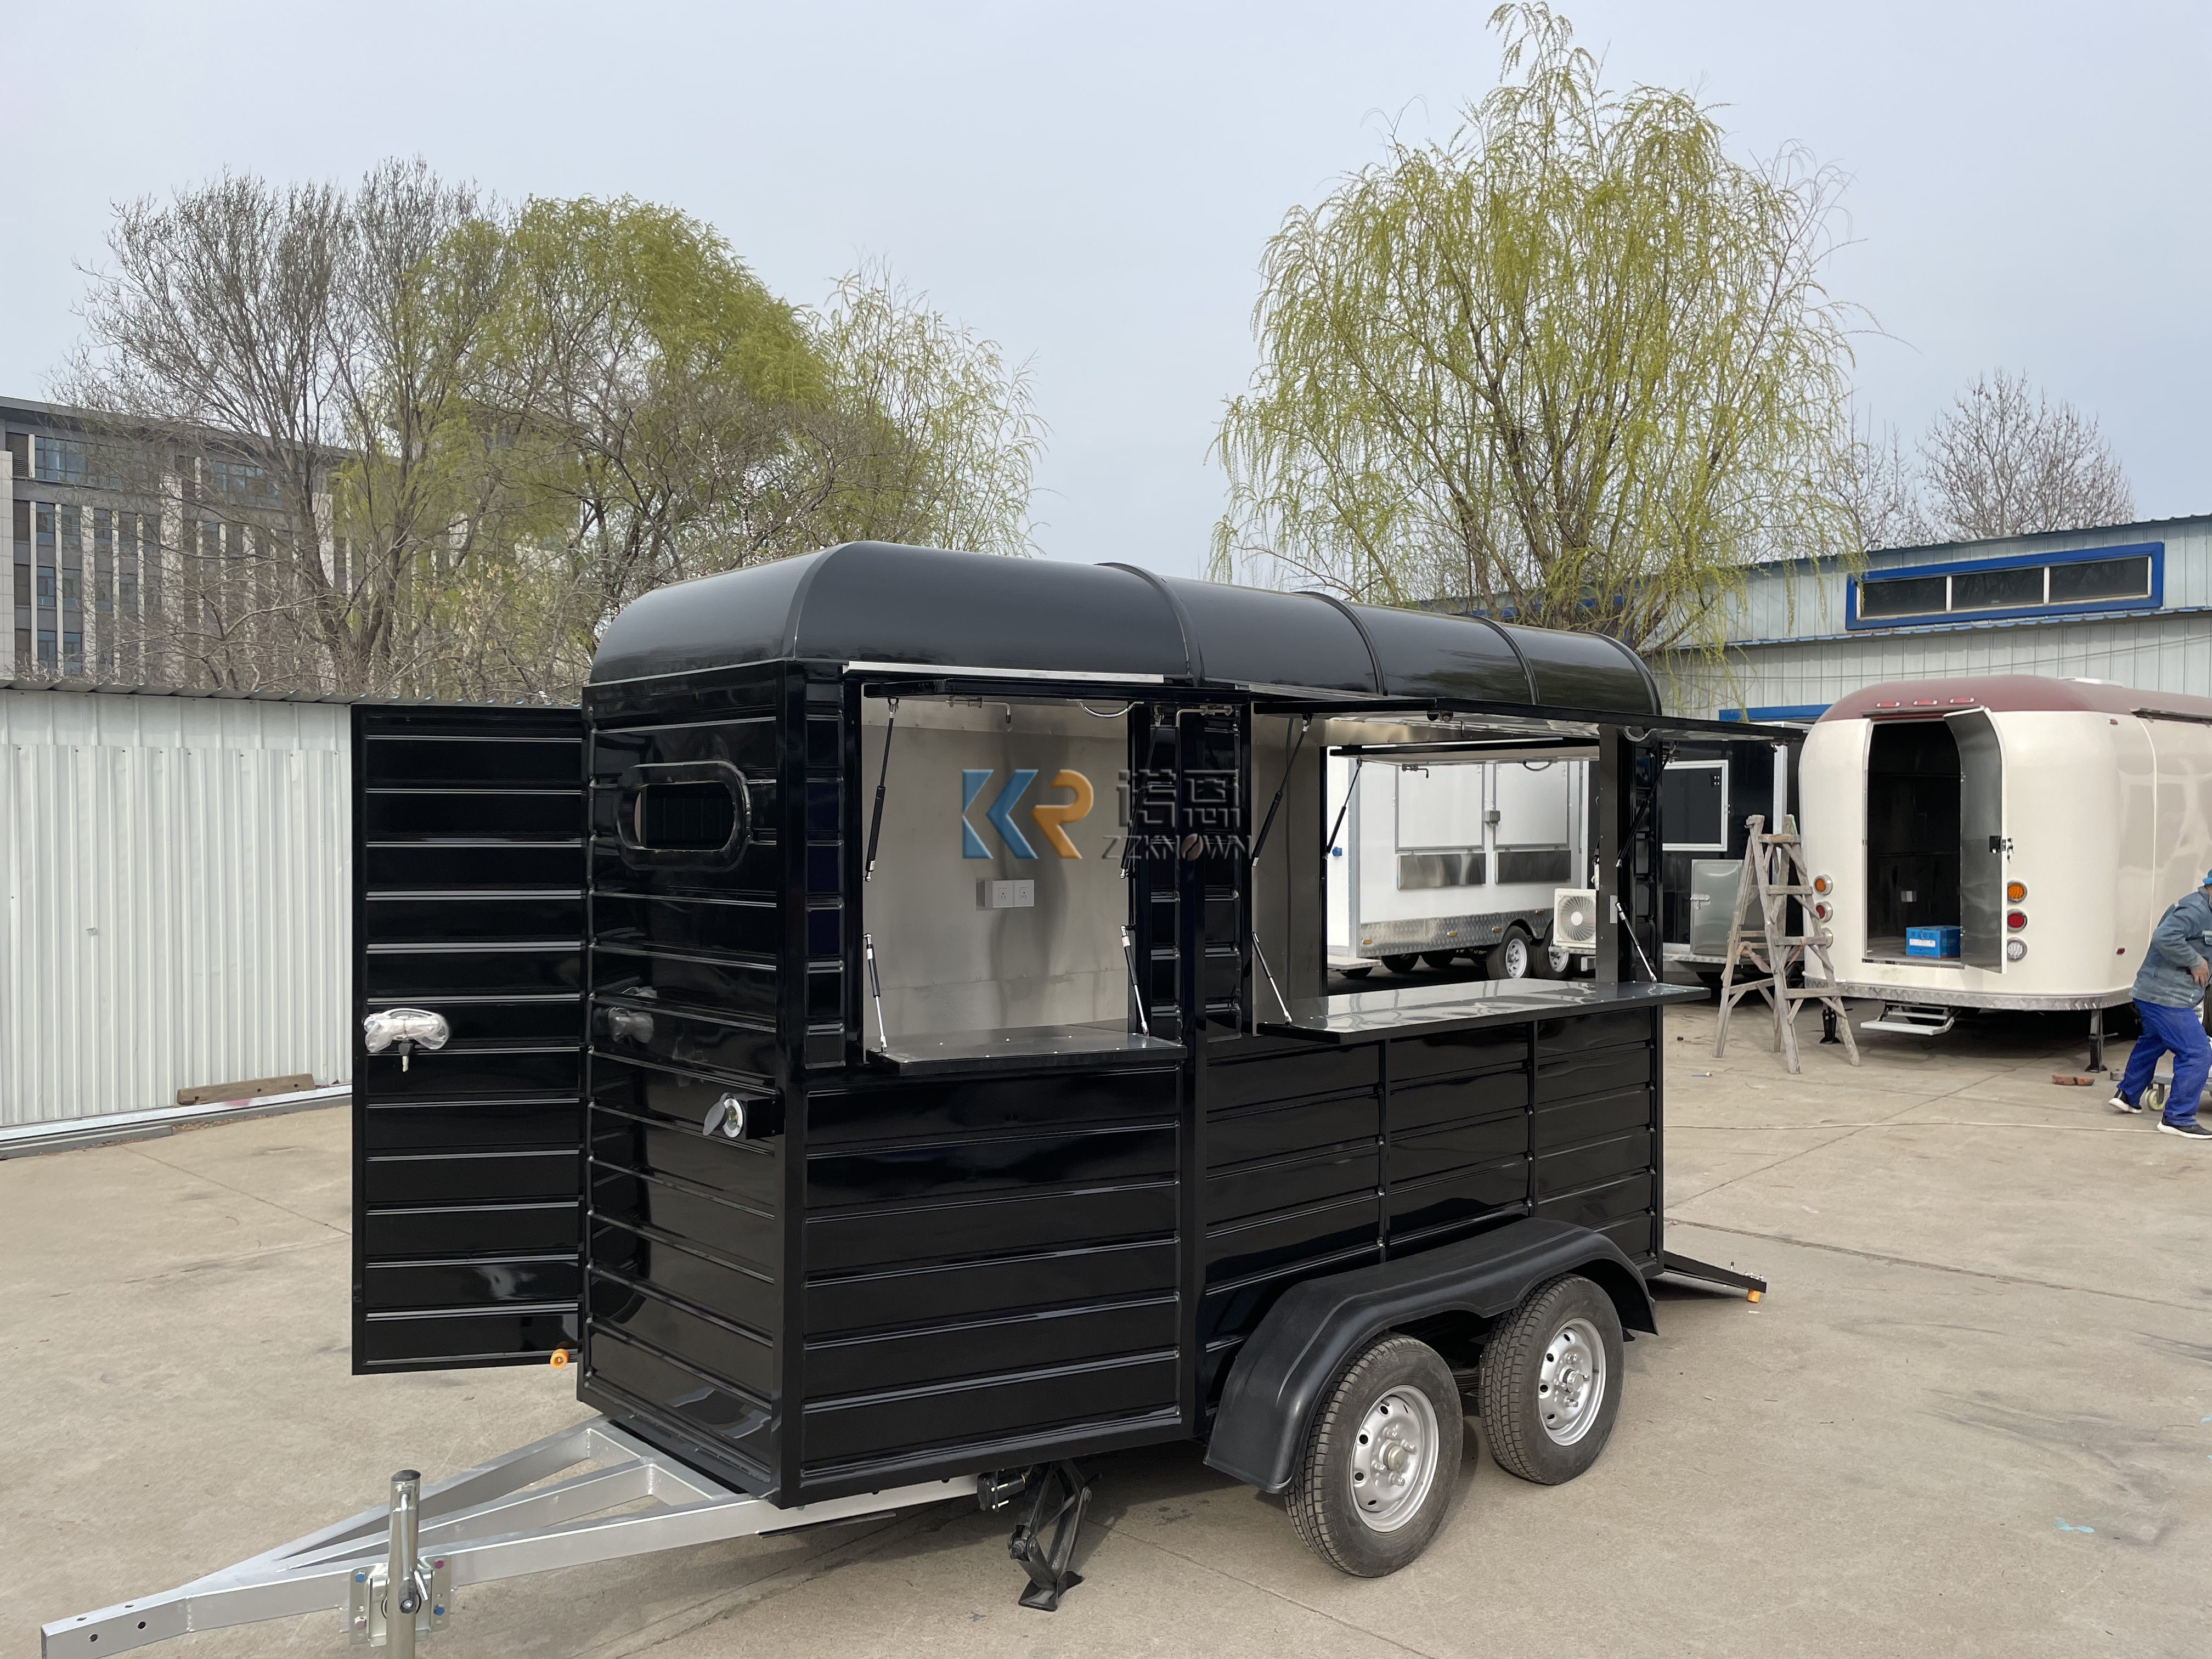 KN-YD-300B Outdoor Food Truck Horsebox Catering Trailer For Sale Food Truck with Full Kitchen